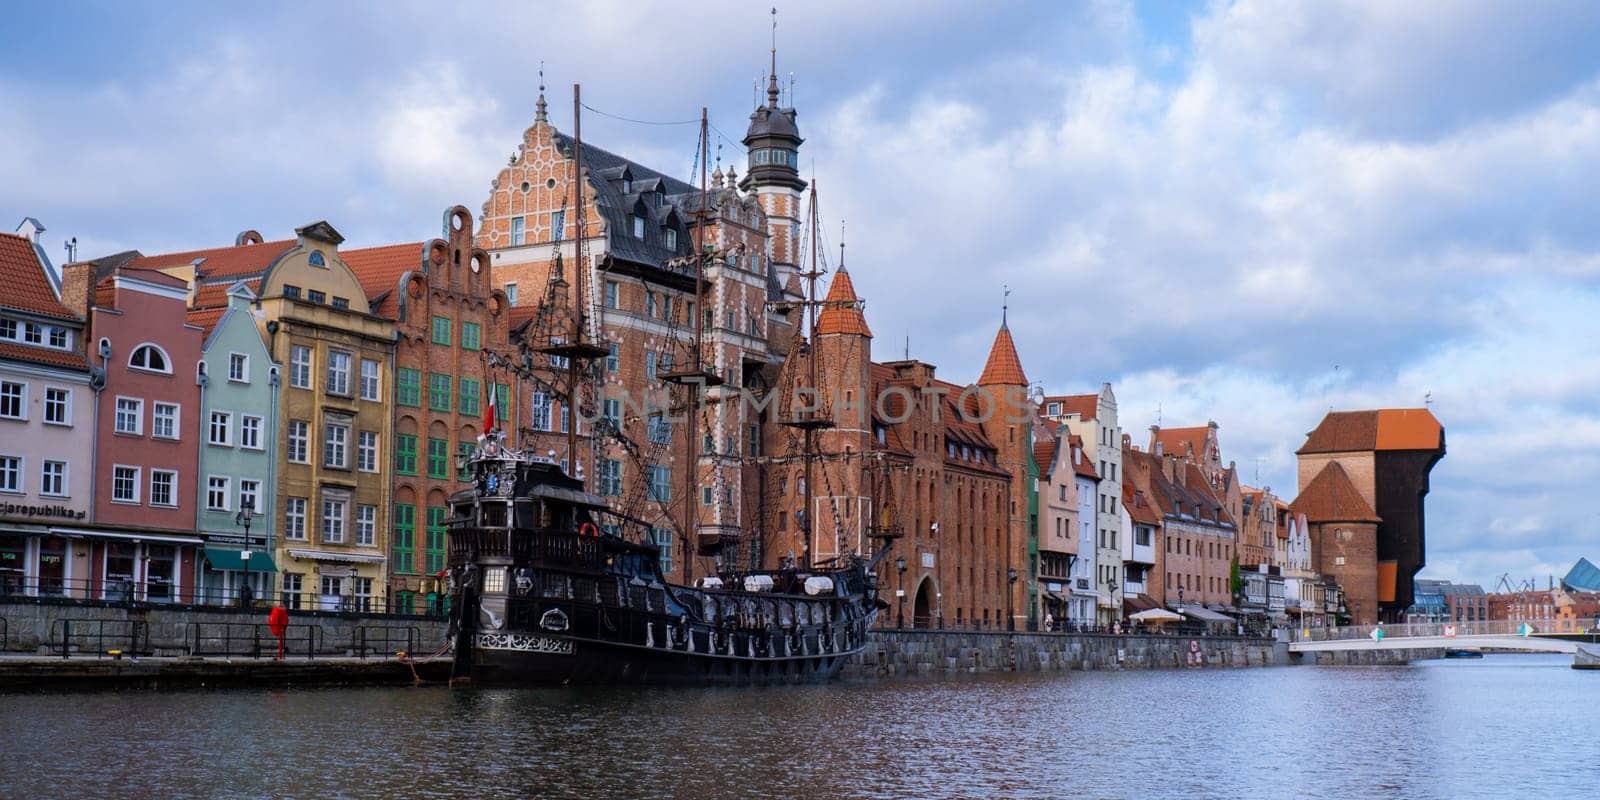 Beautiful old town of Gdansk over Motlawa river Vintage ship pirate caravels sailing on Motlawa river with historic port Crane in Old Town on background. Gdansk, Poland. This ship imitating XVII century galleon is big tourist attraction of Tri city in Poland. Travel destination